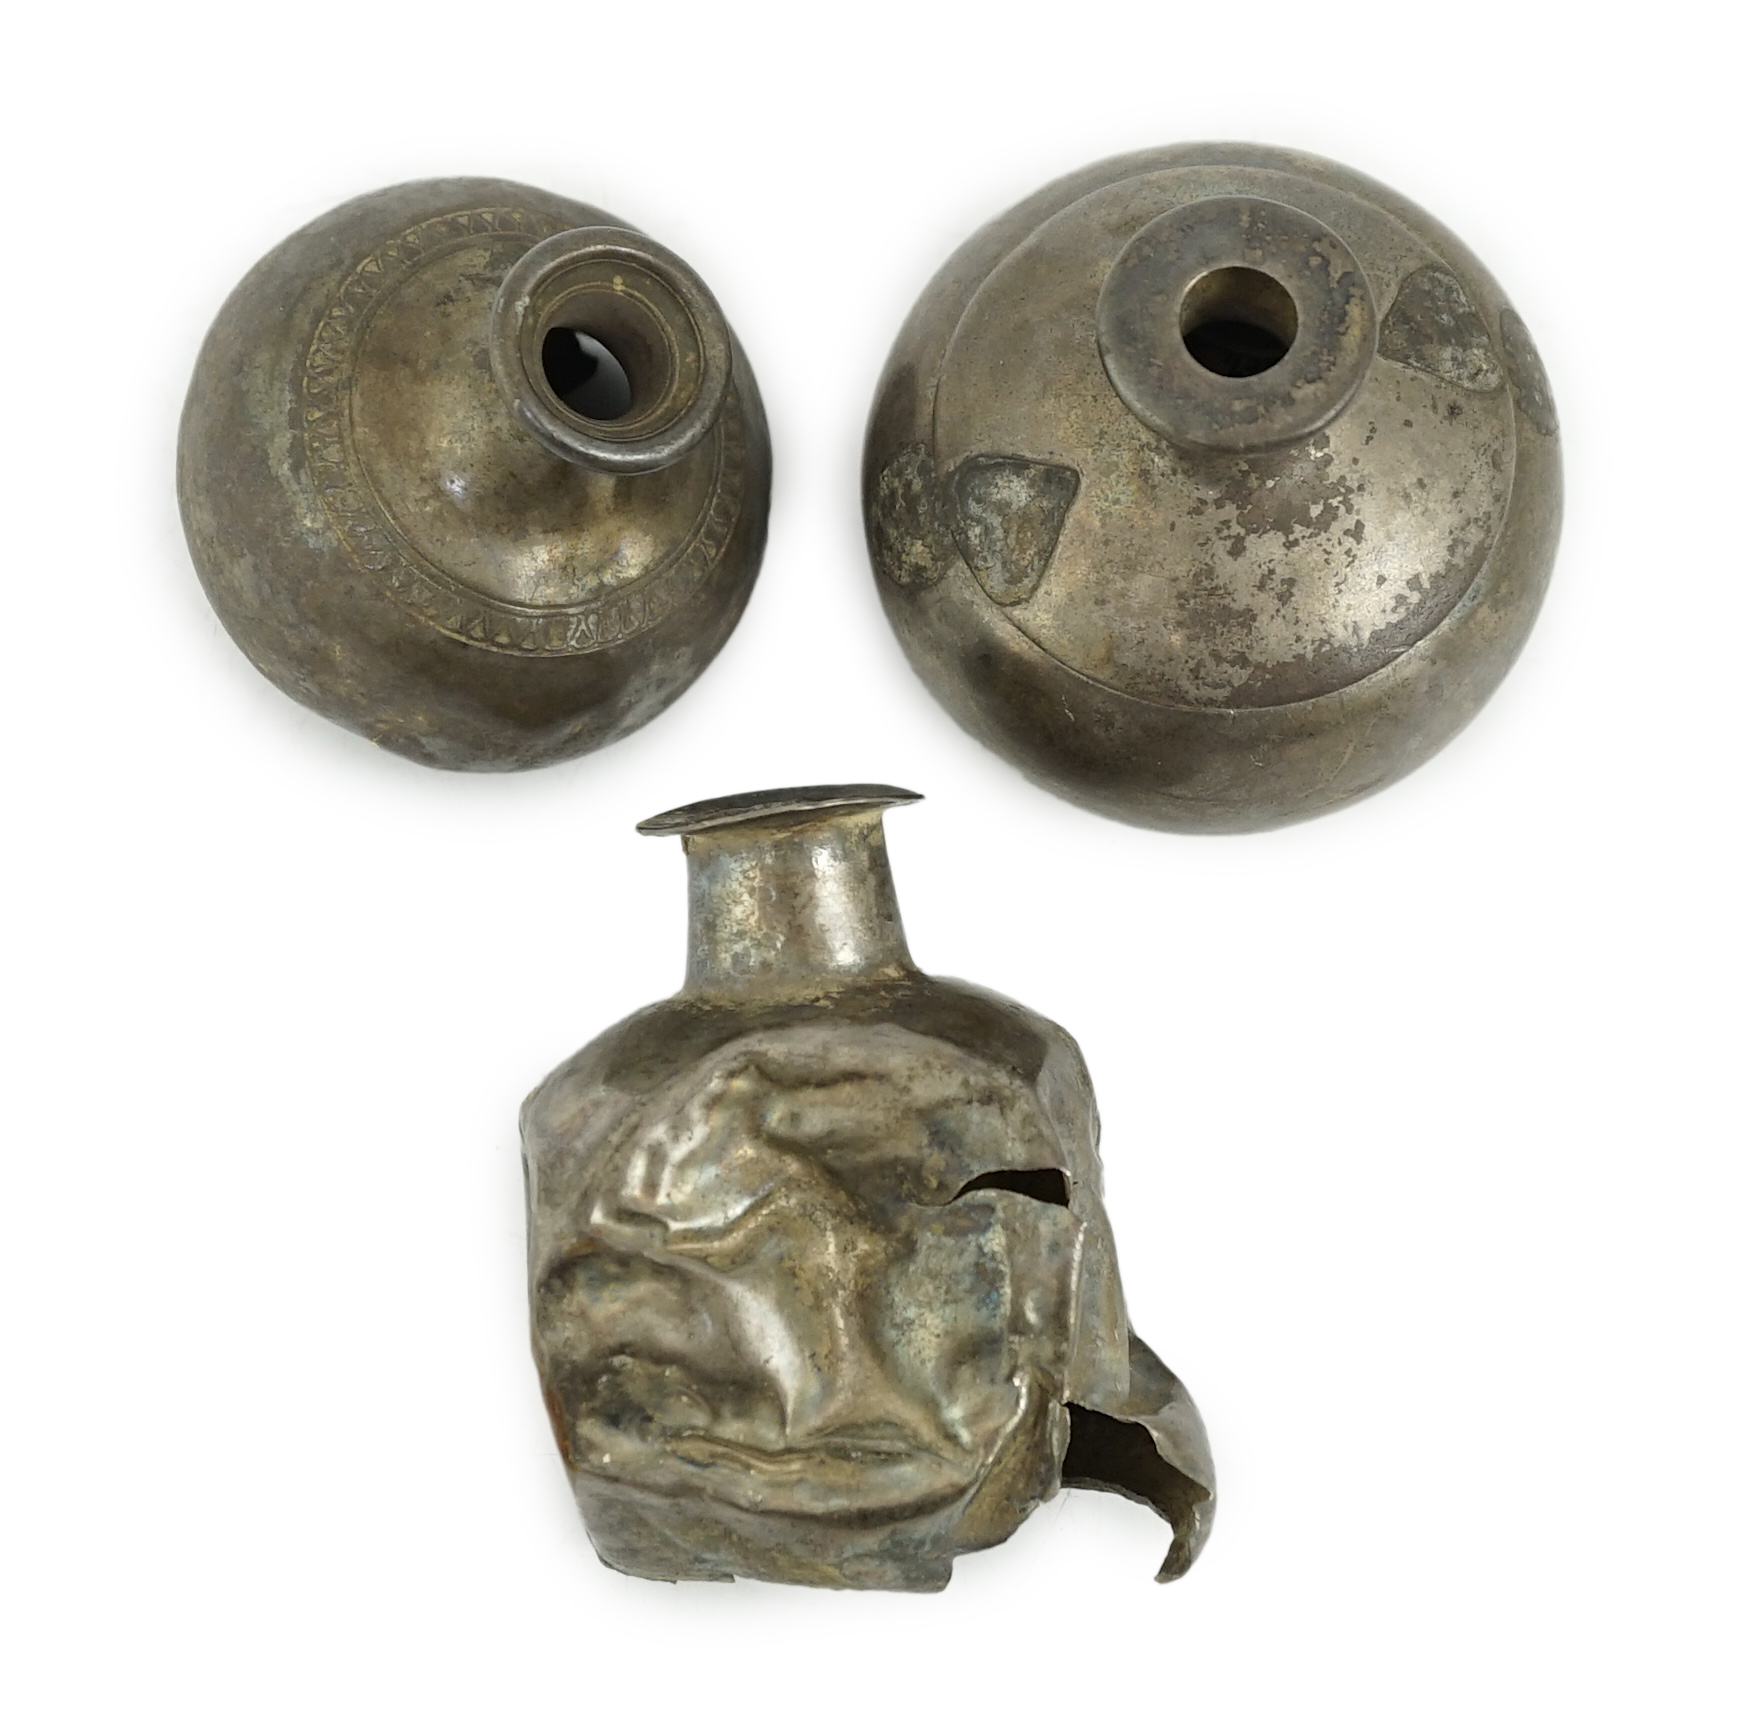 Three silver aryballoi, incomplete, Roman or Gandhara, c. late 1st century BC - early 1st century A.D.